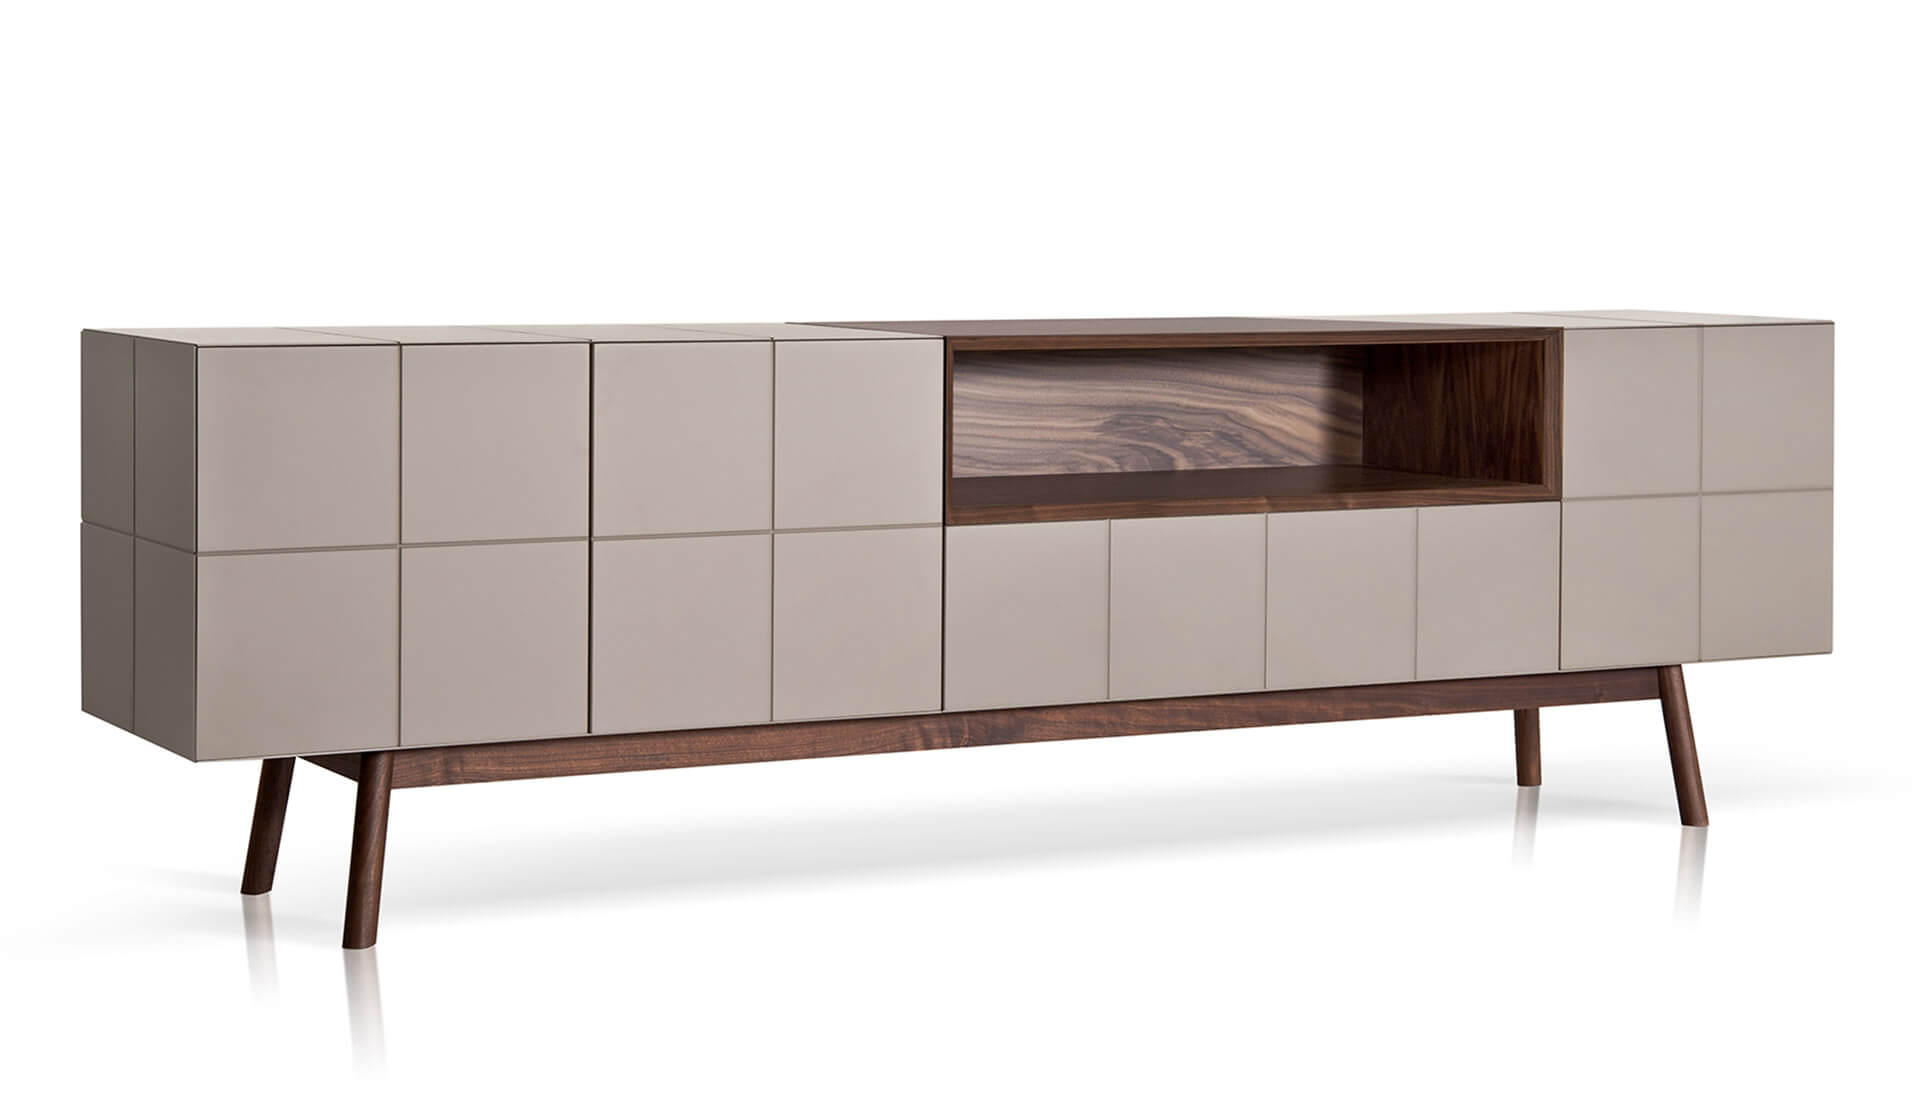 Mos-i-ko A 003 in lacquer and walnut wood. al2, art for living